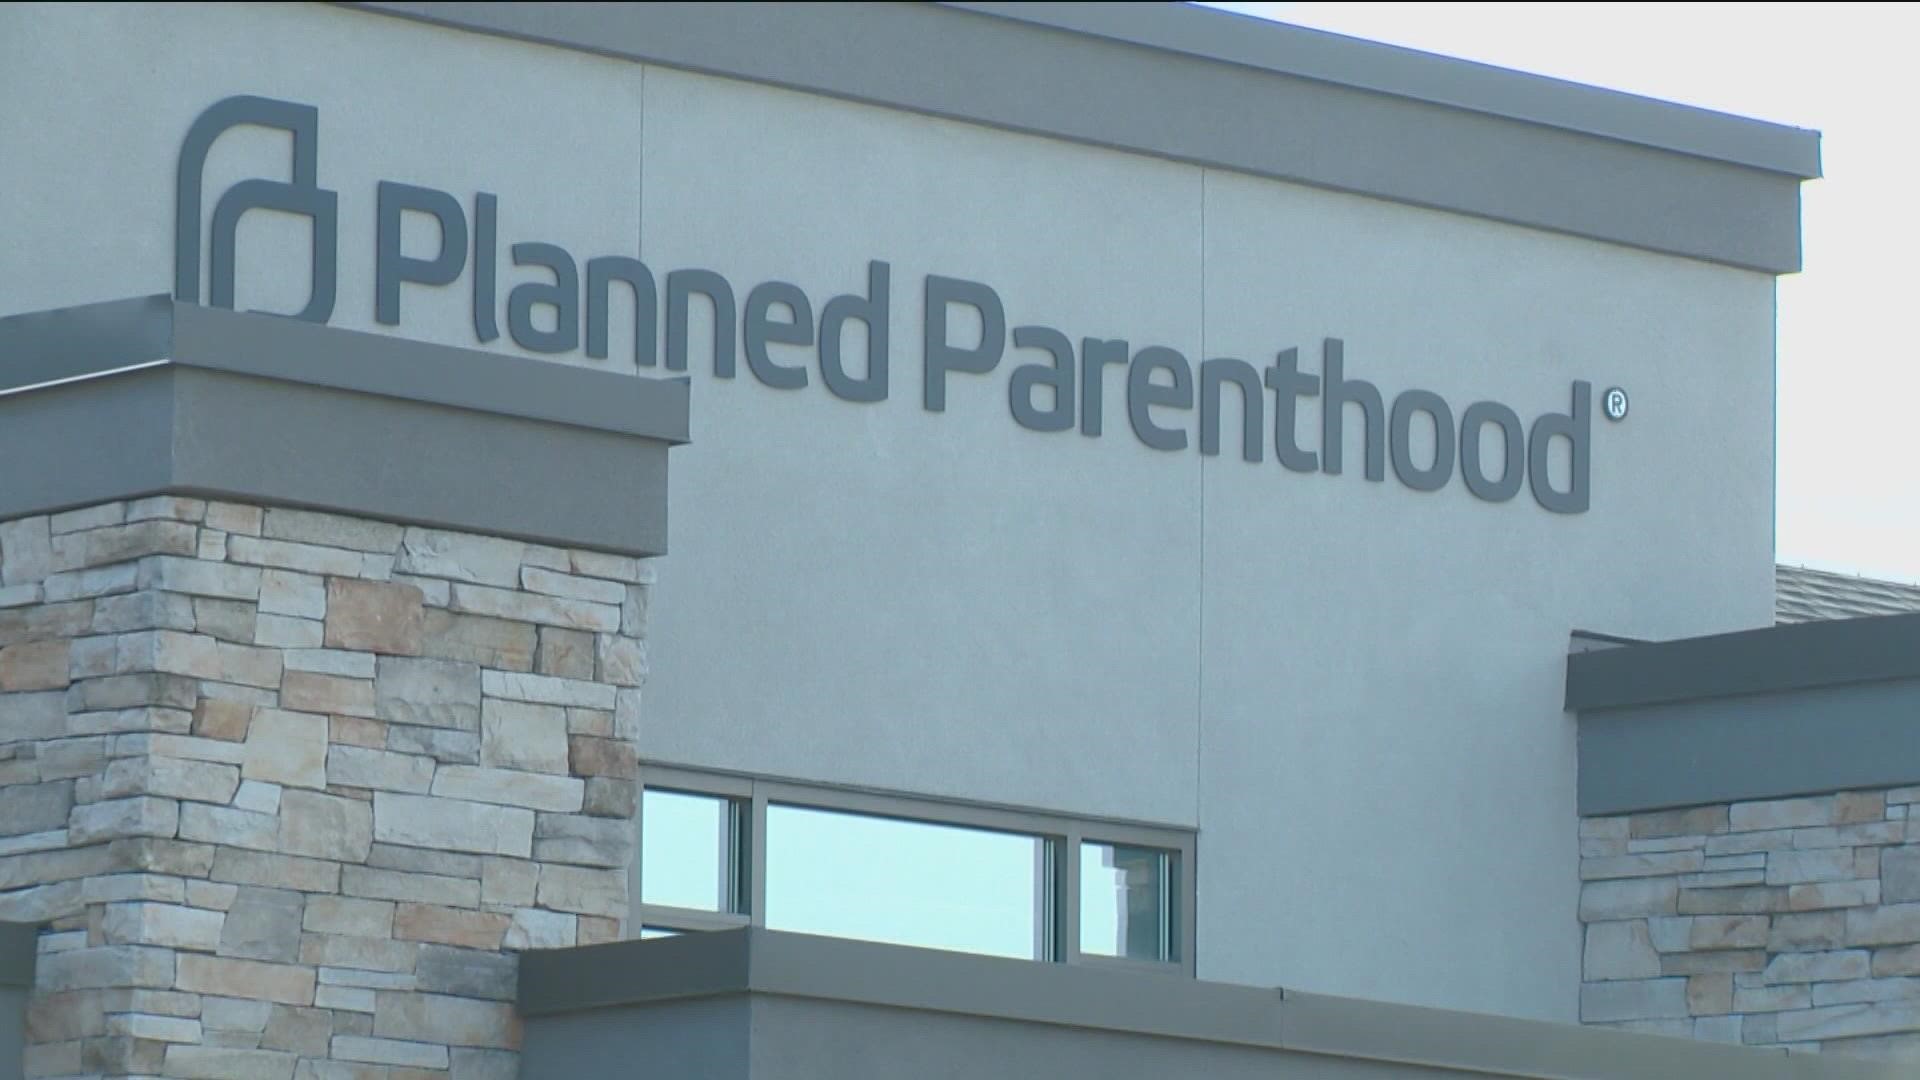 Idaho's abortion laws are set to change Friday, creating questions for Idahoans who may seek an abortion in the future.